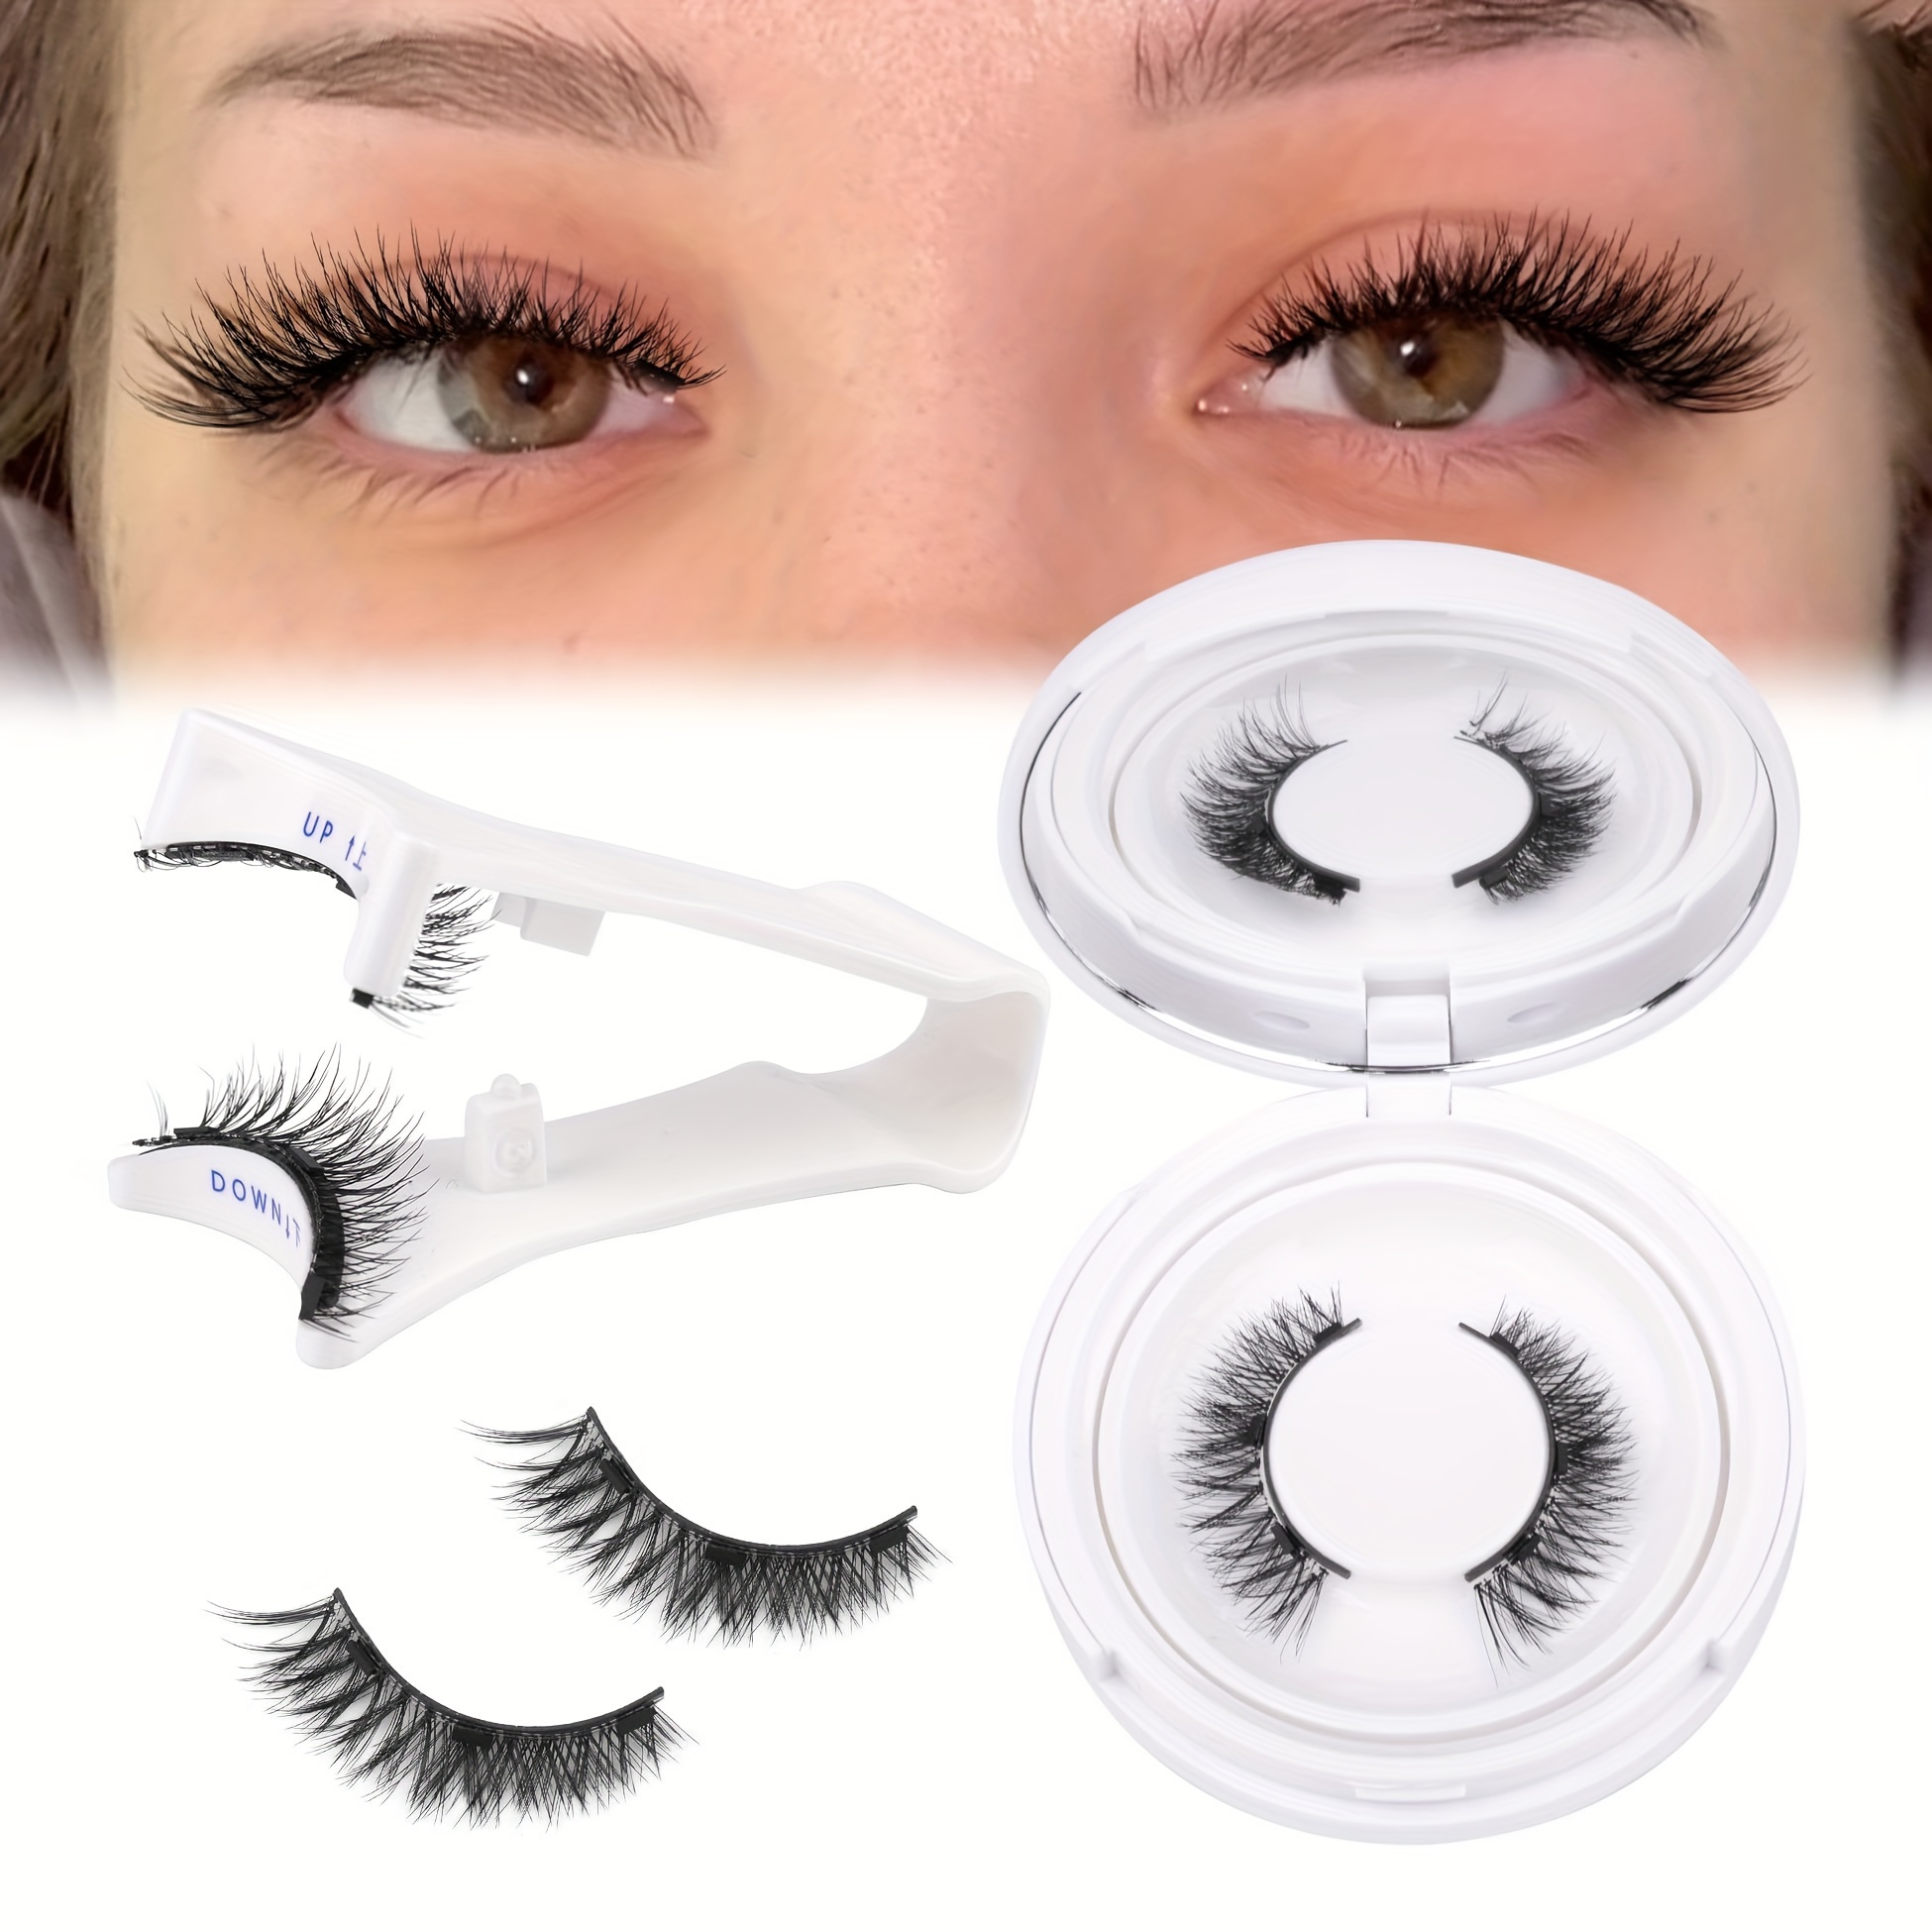 

Magnetic False Eyelashes Single Pair Set - Beginner Friendly Reusable Doll & Cat Eye Style Lashes, Cross & Natural Look, Ultra-thin 0.07mm D , Mixed Lengths 6-9mm & 16-18mm